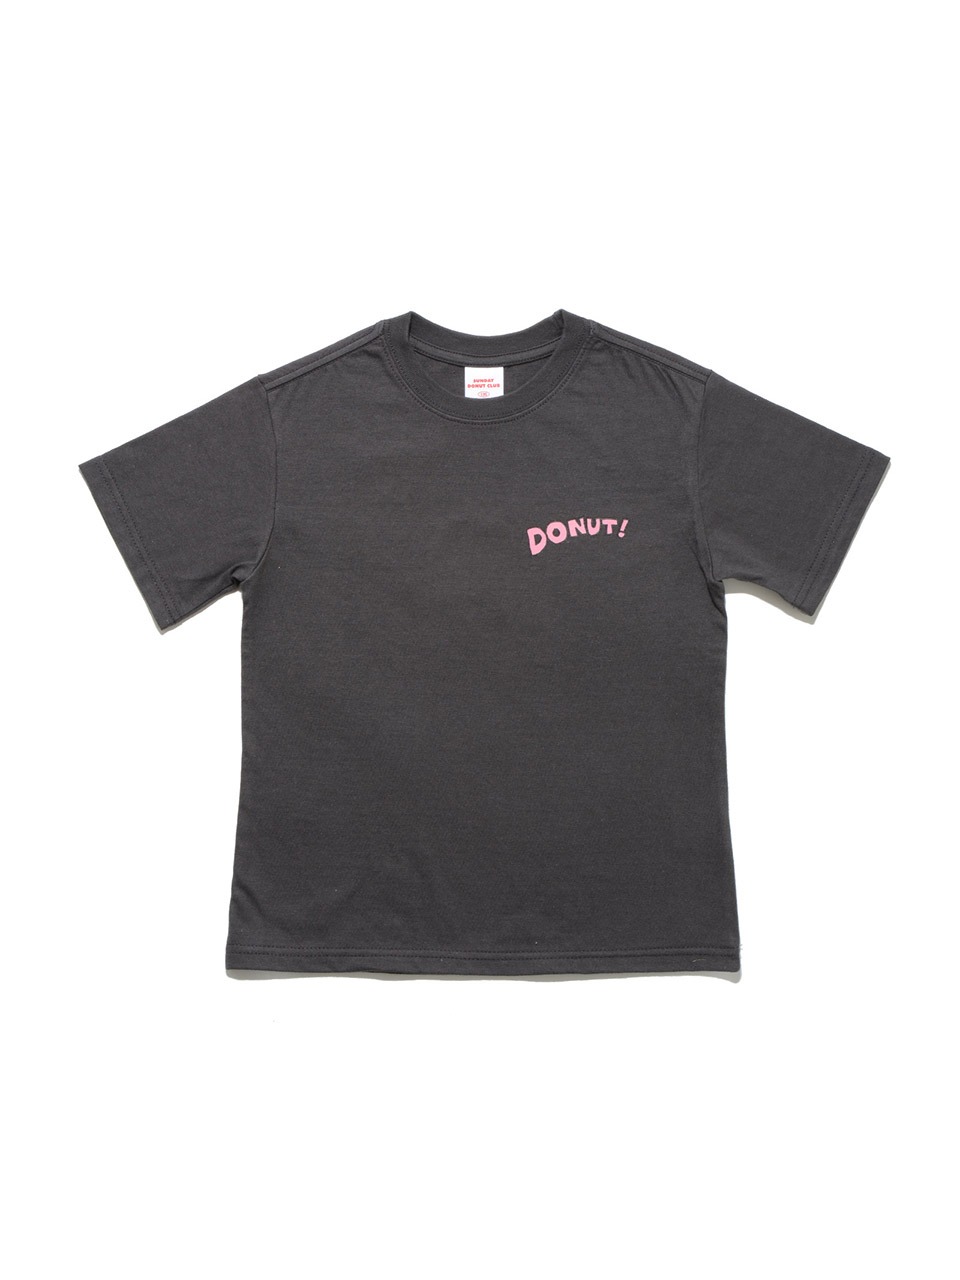 SUNNY ALL DAY TEE [Charcoal]